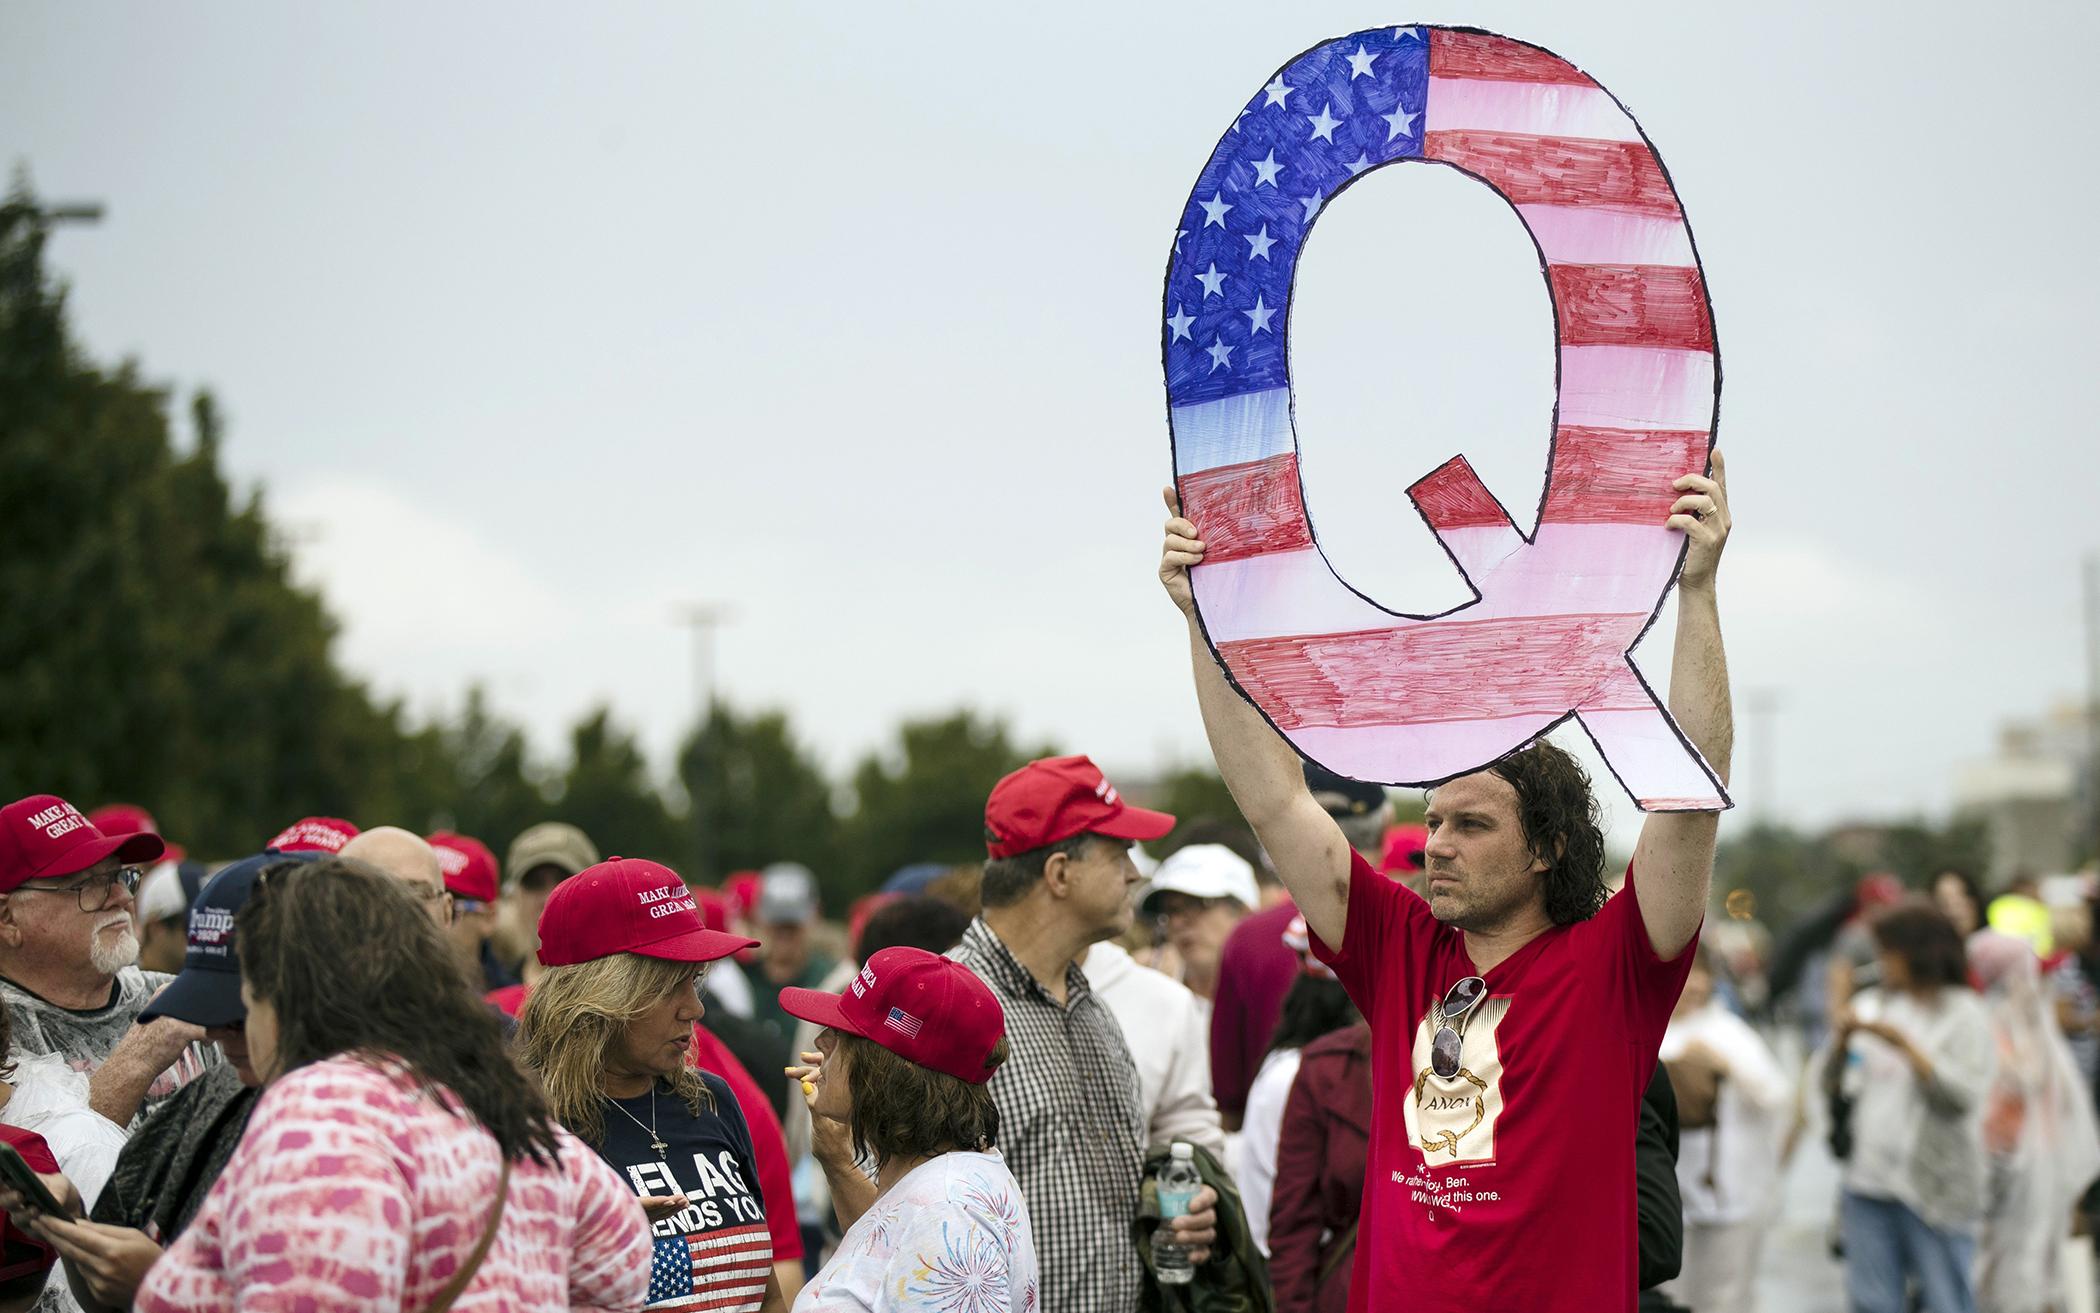 In this 2018 photo, David Reinert holding a Q sign waits in line with others to enter a campaign rally with President Donald Trump in Wilkes-Barre, Pa. 